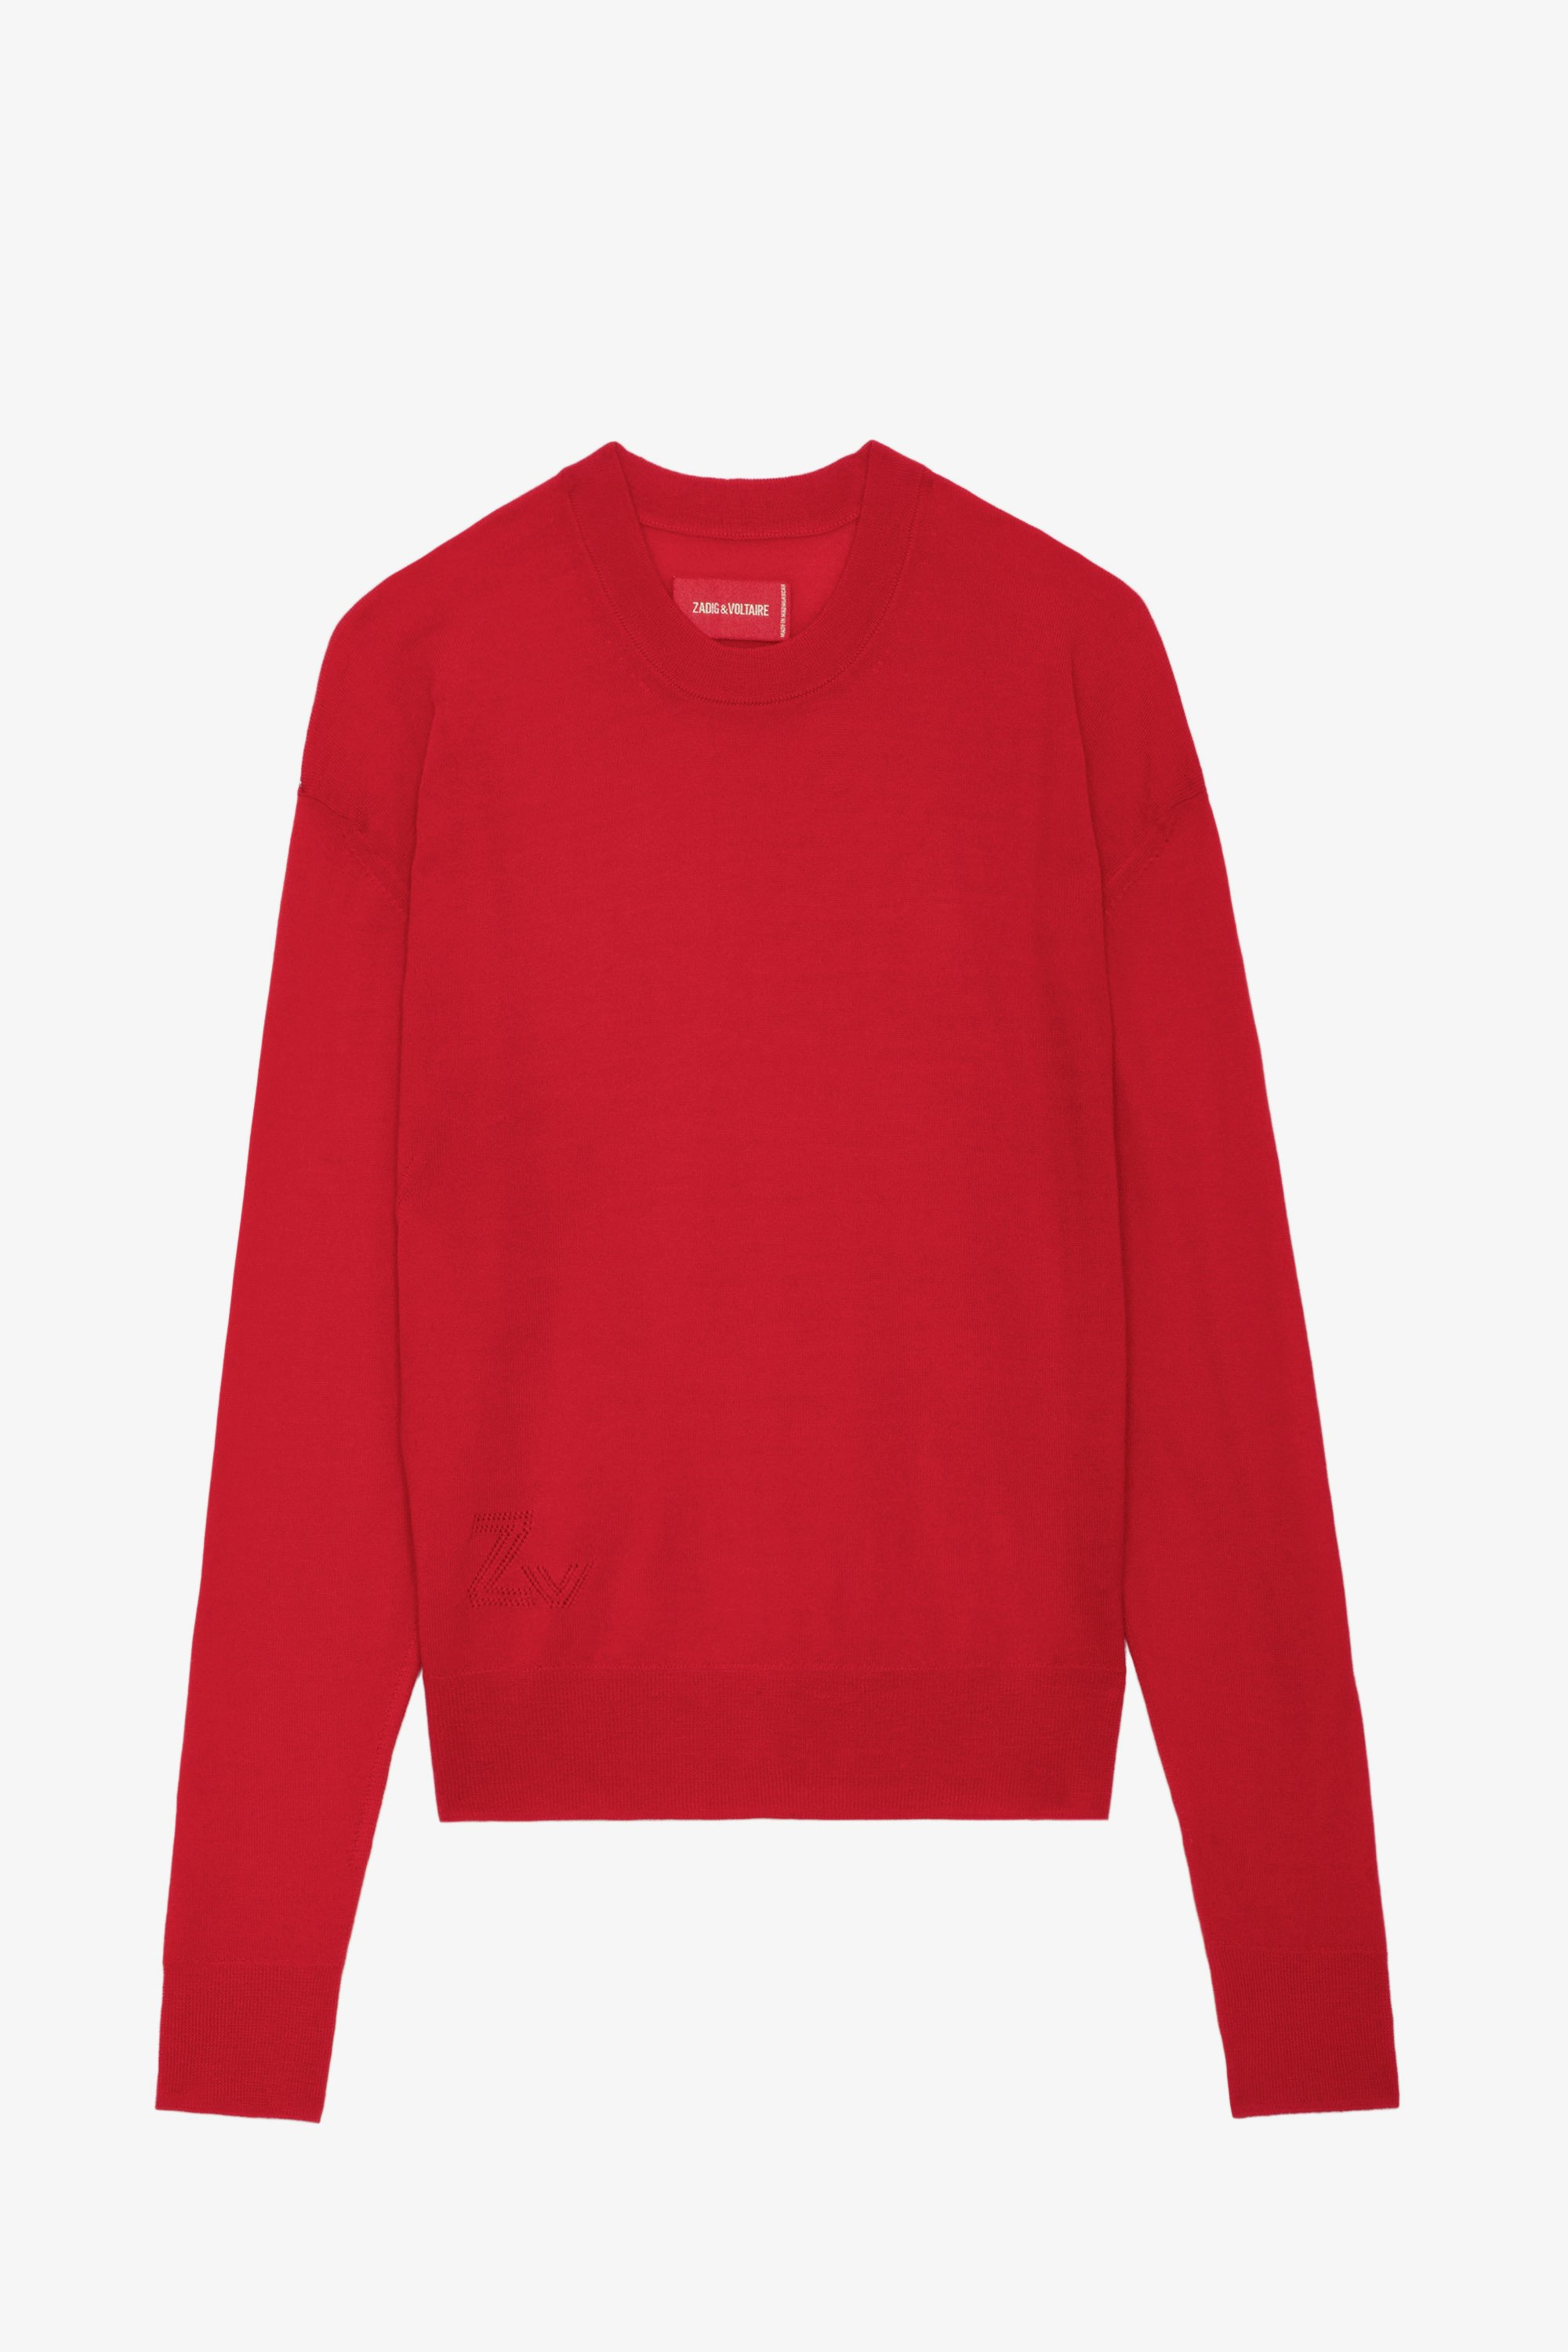 Emmy Sweater - Red merino wool round-neck jumper with long sleeves featuring a cut-out.